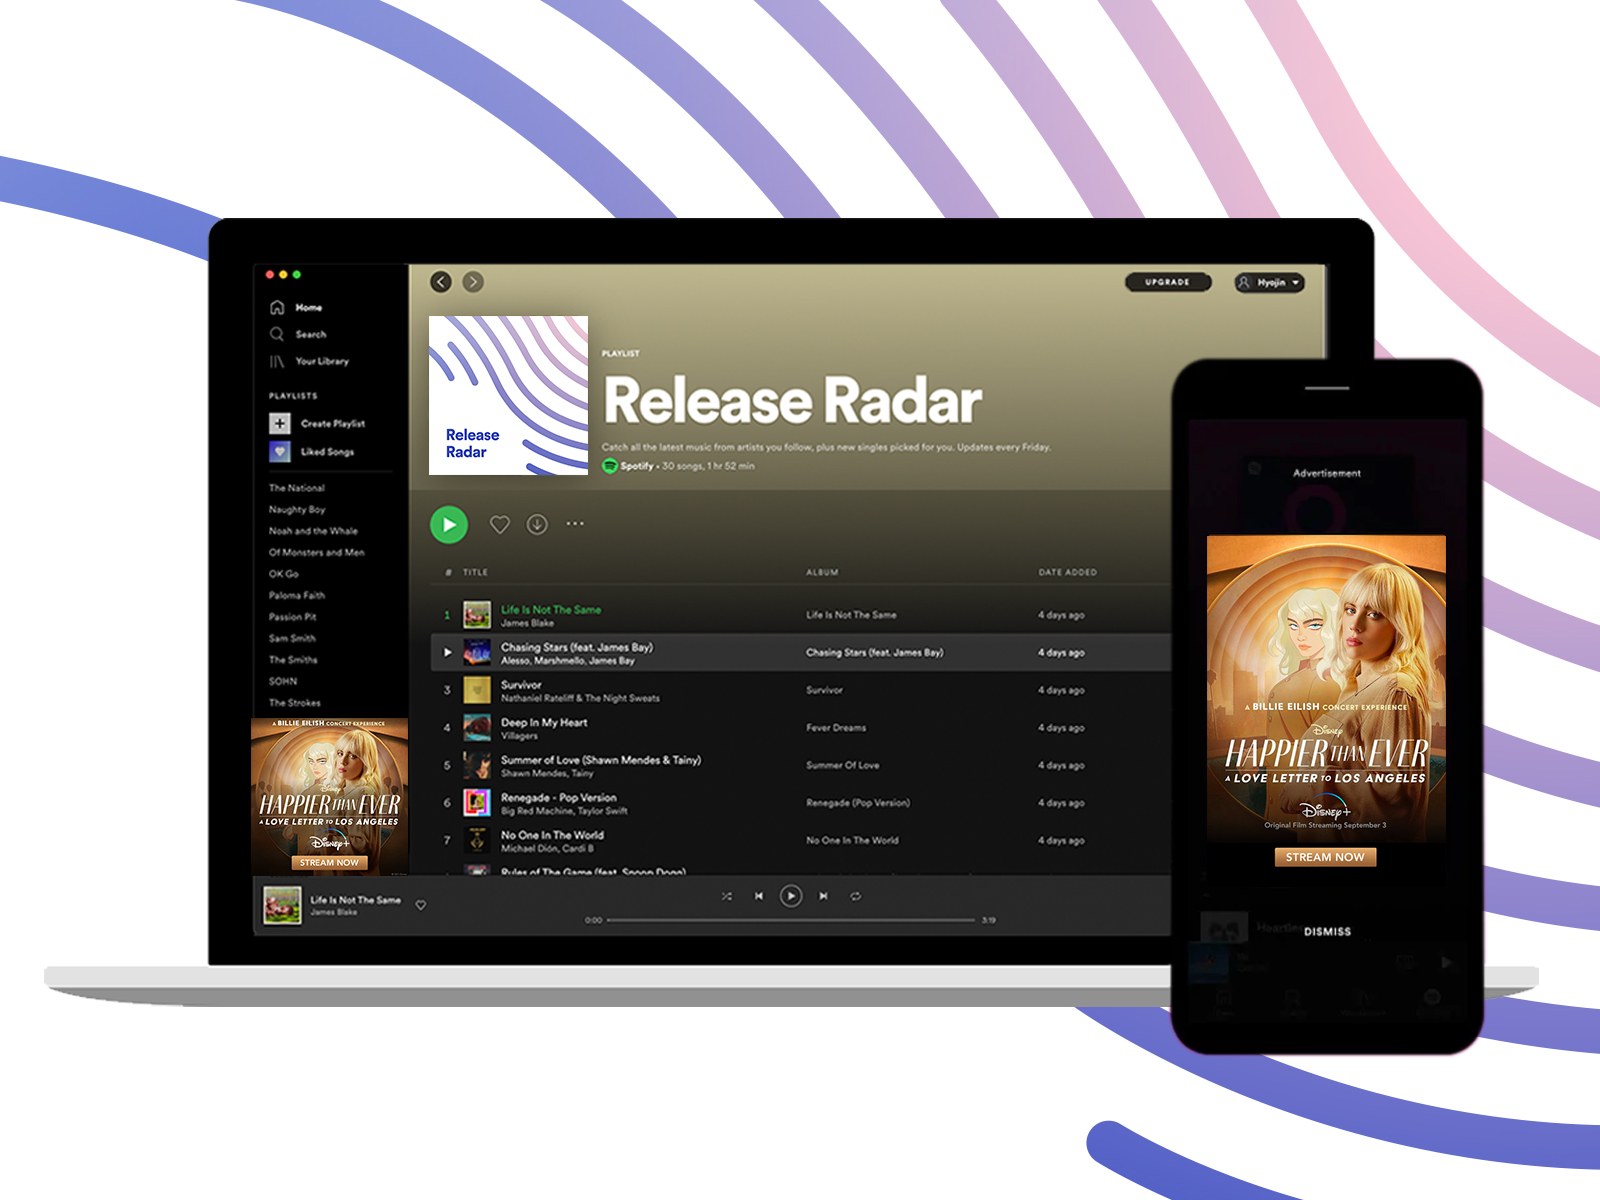 Spotify’s Release Radar is the third personalized playlist to open up to sponsorships